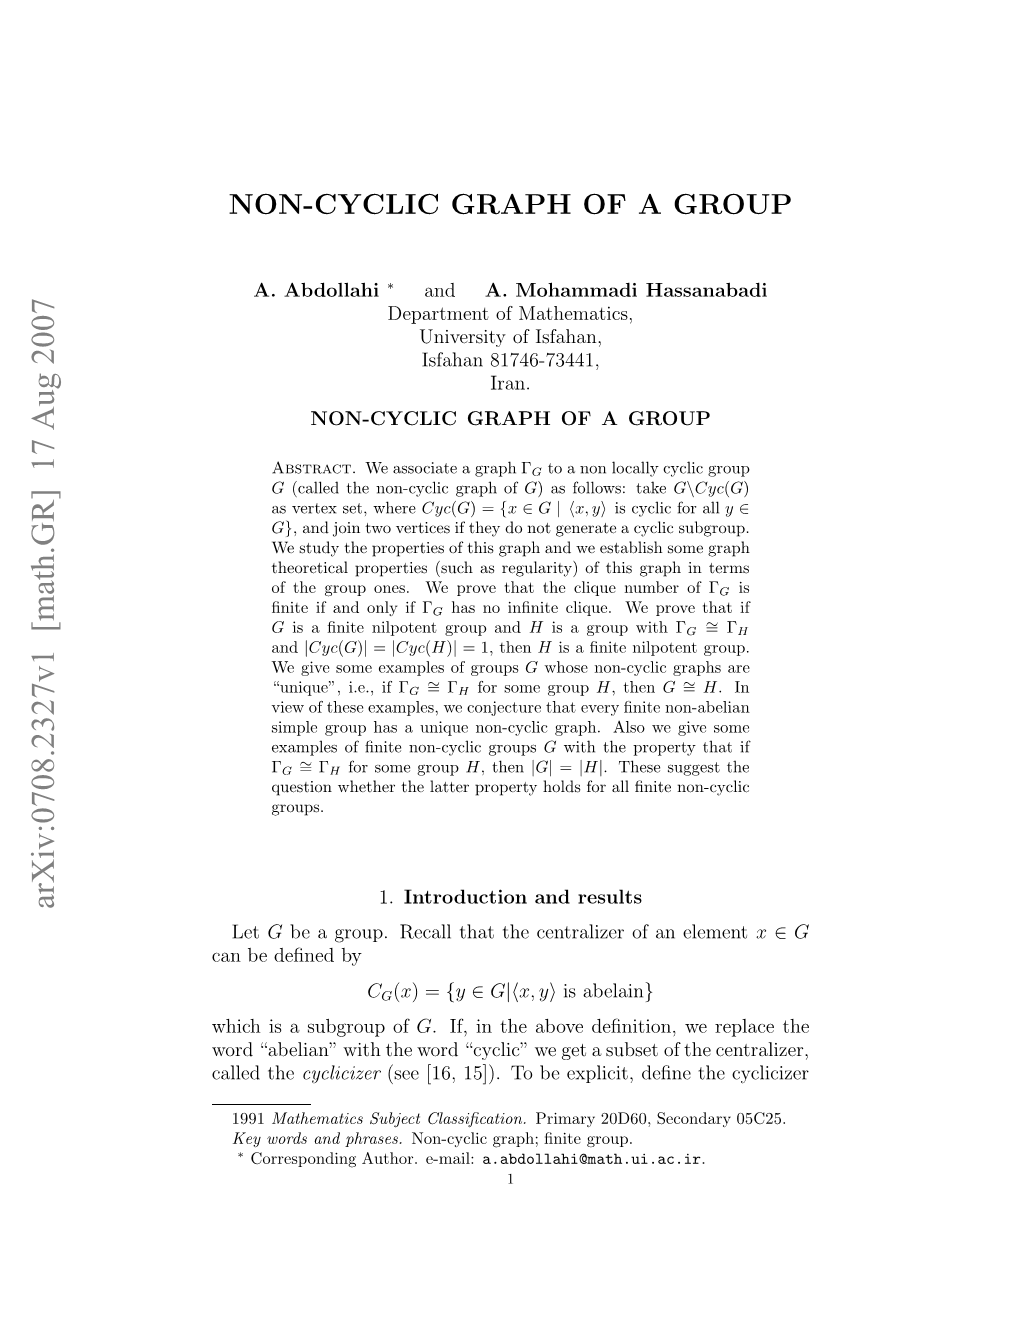 Non-Cyclic Graph of a Group, E.G., the Non-Cyclic Graph of Any Non Locally Cyclic Group Is Always Connected and Its Diameter Is Less Than Or Equal to 3